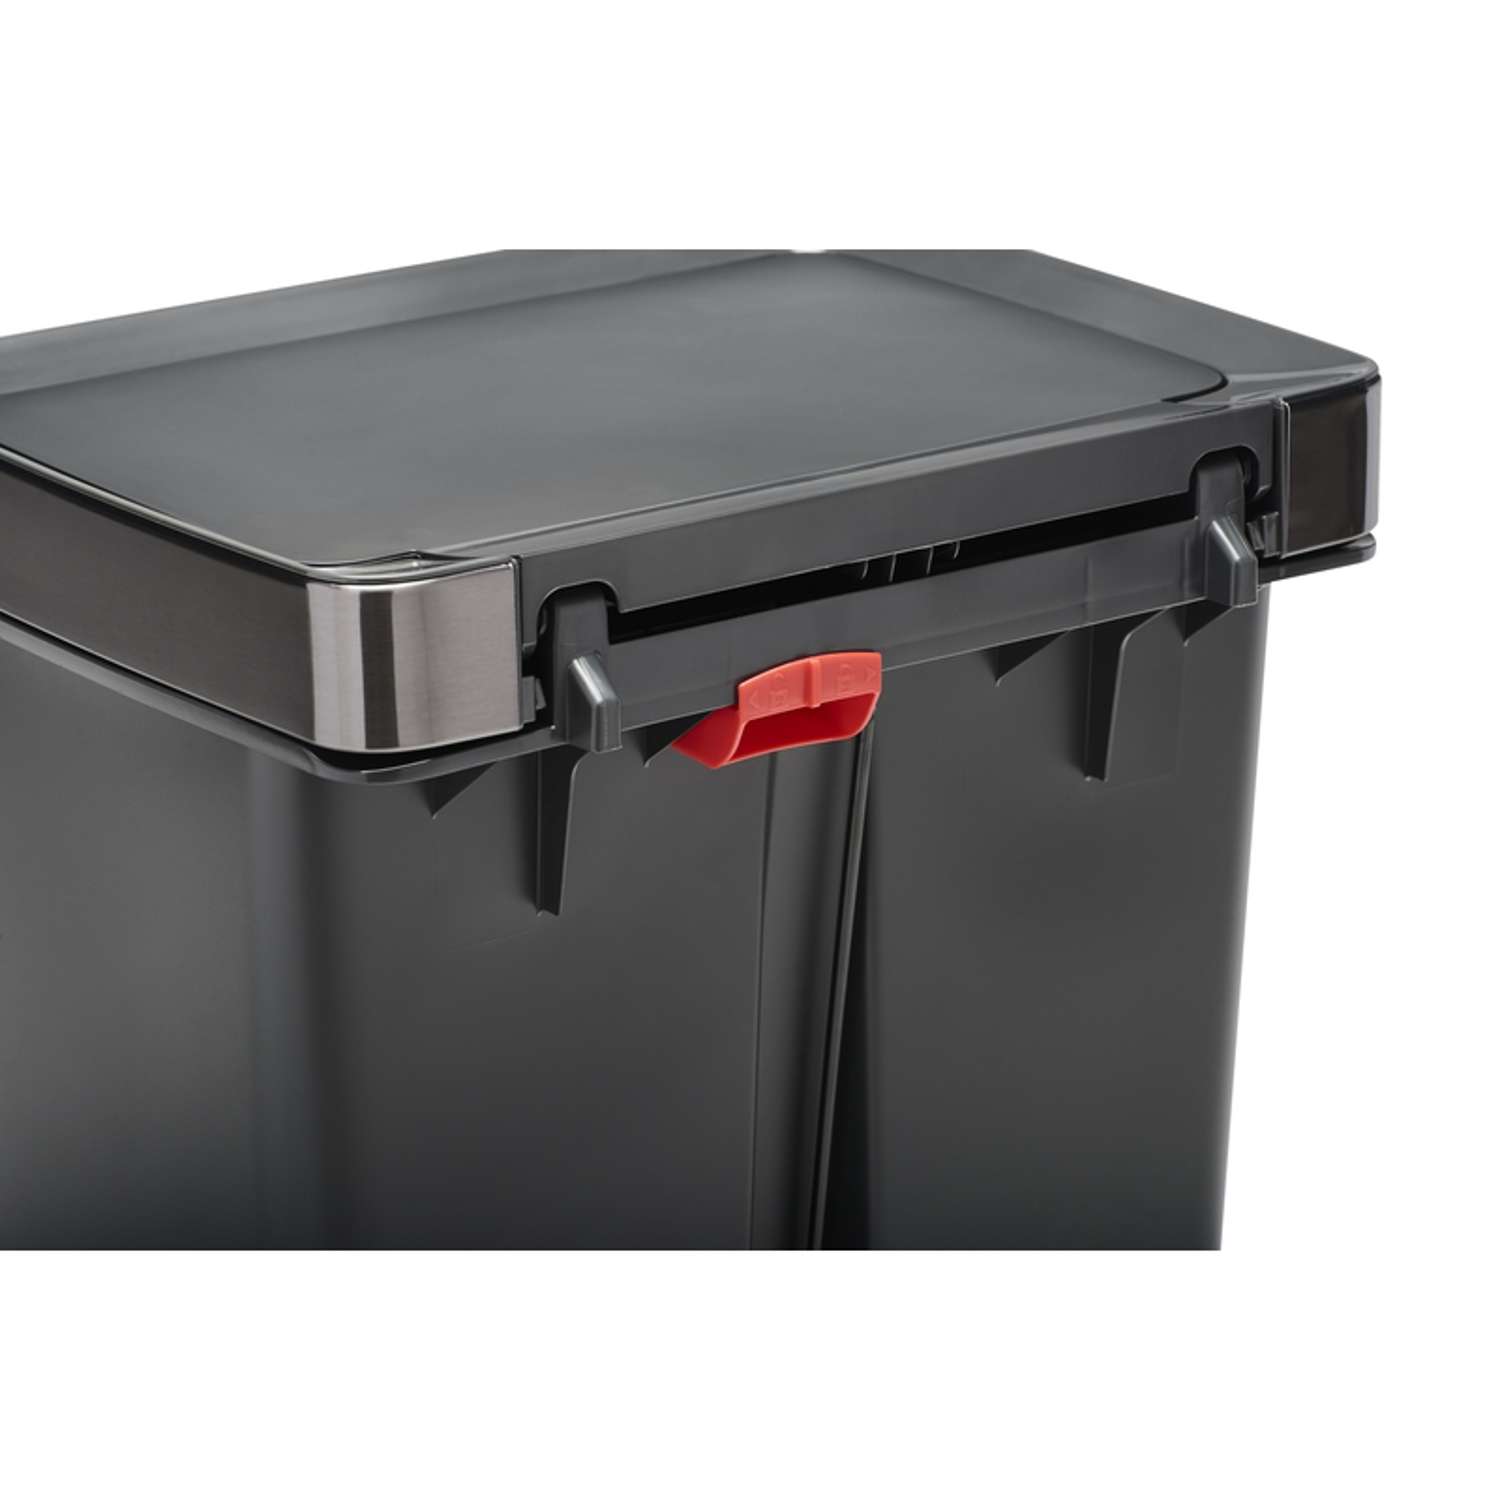 Rubbermaid Premium 13 gal. Gray Step-On Trash Can